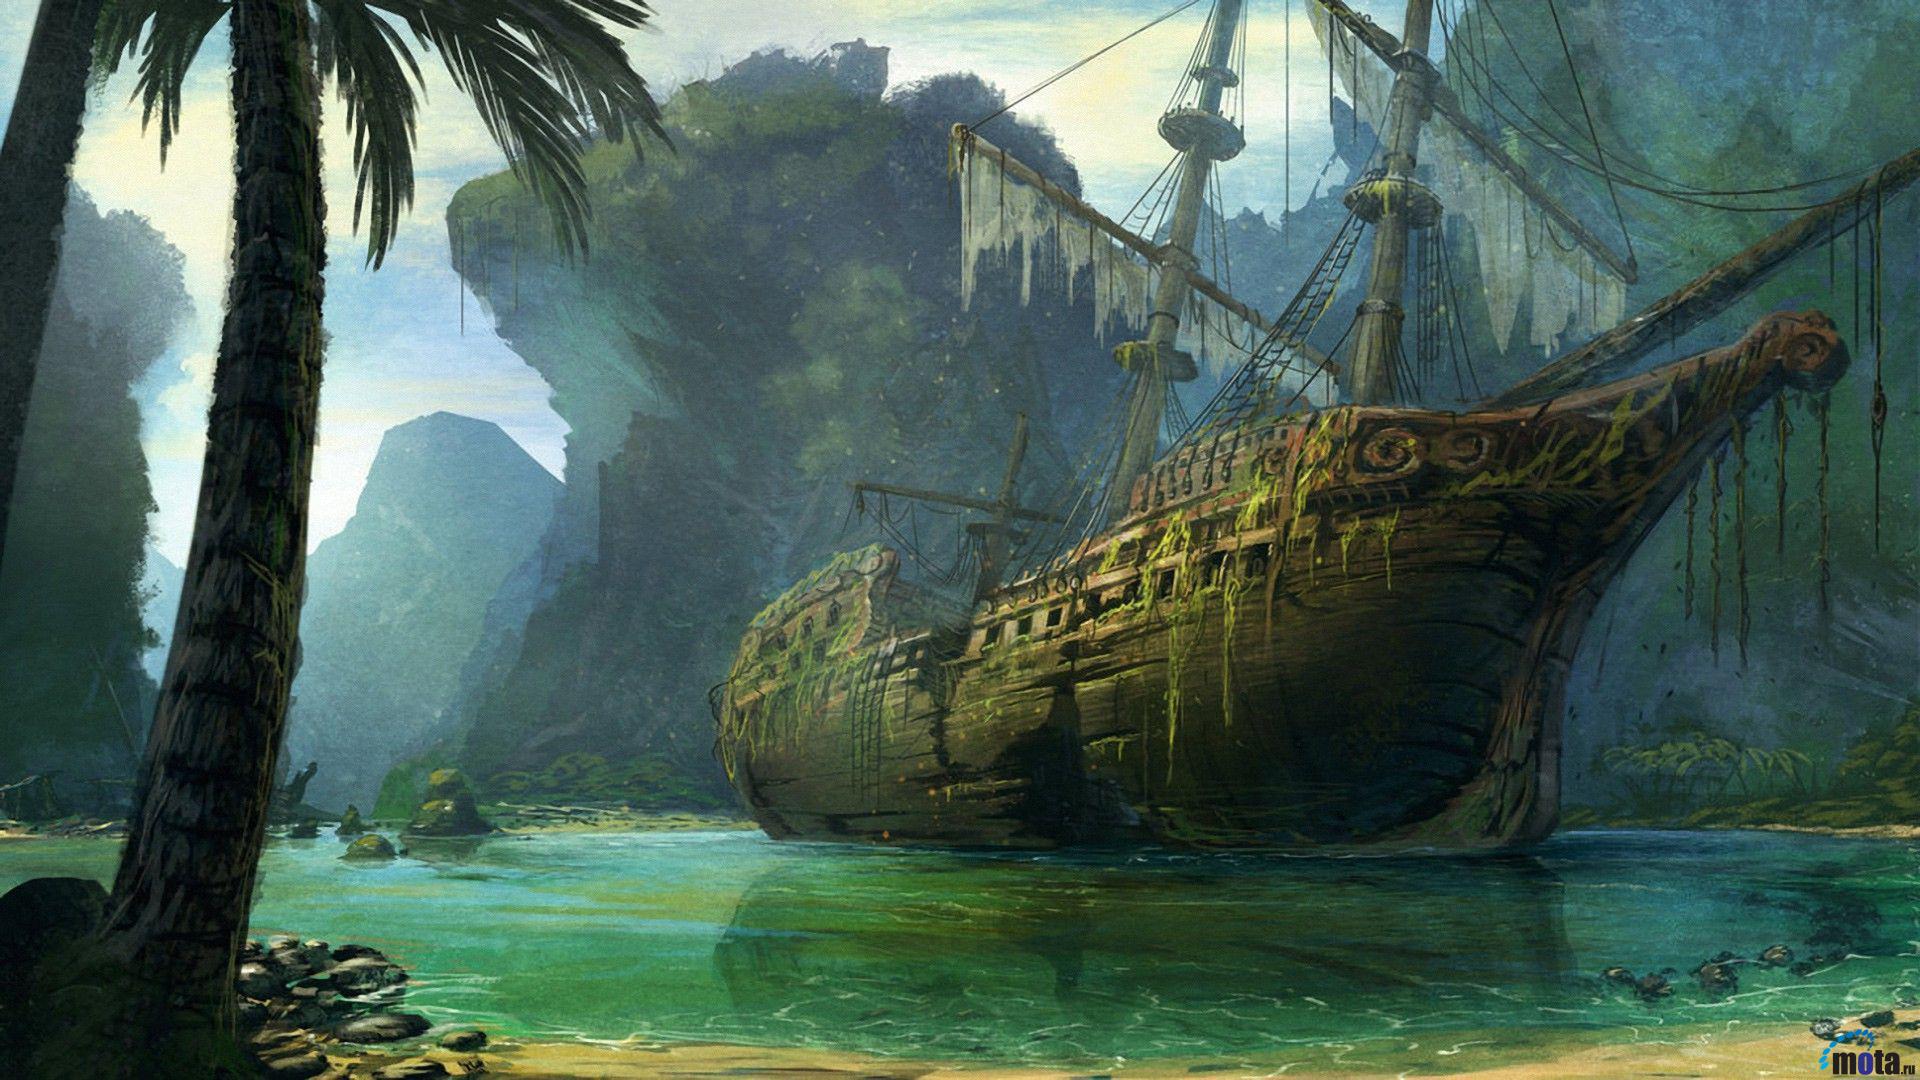 Download Wallpaper Old pirate ship (1920 x 1080 HDTV 1080p ...